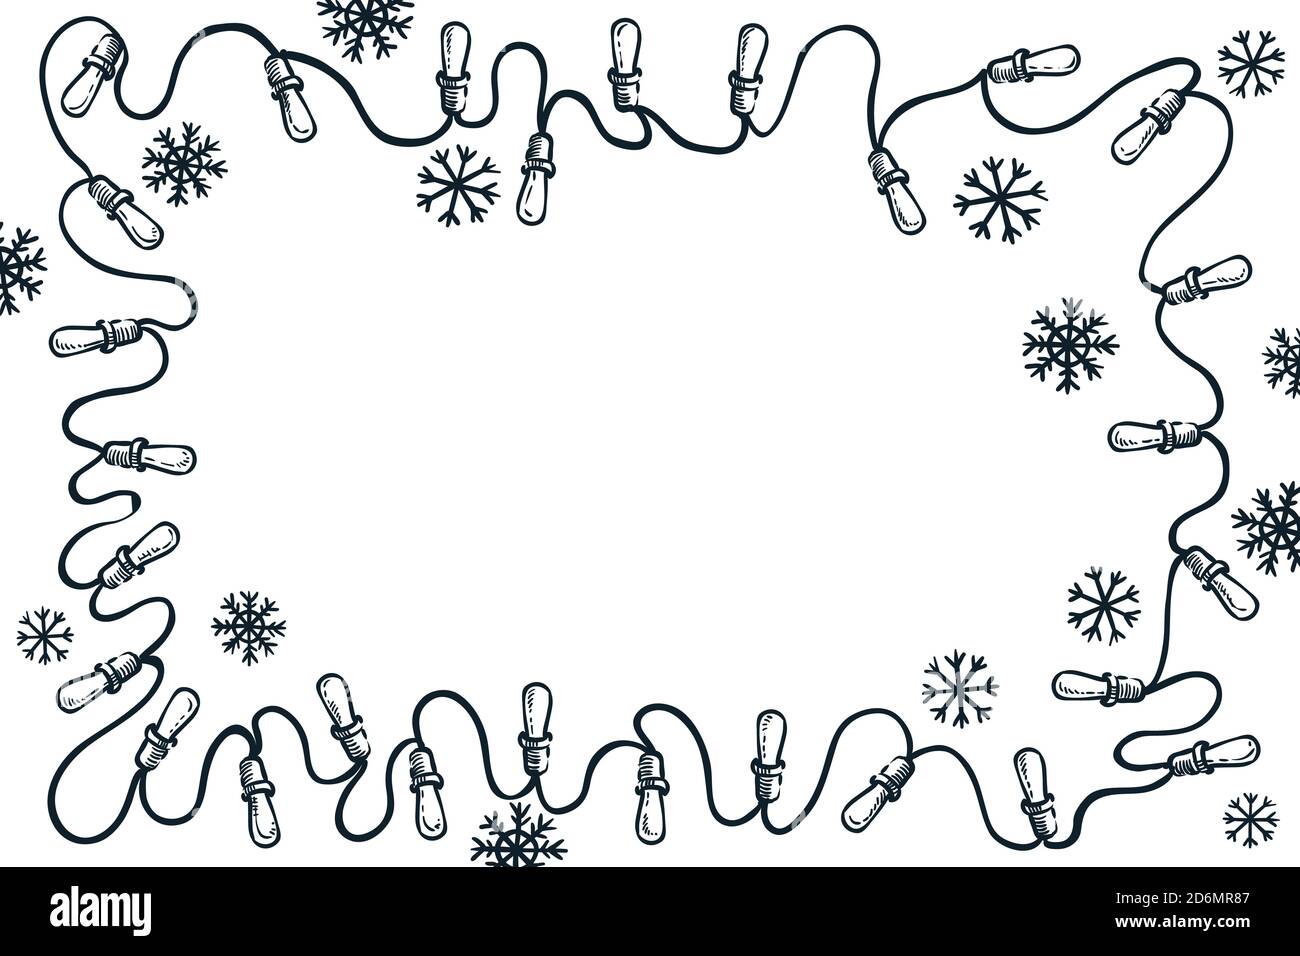 Garland lights and snowflakes border frame, vector sketch illustration. Christmas, New Year simple greeting card background with copy space. Holiday b Stock Vector